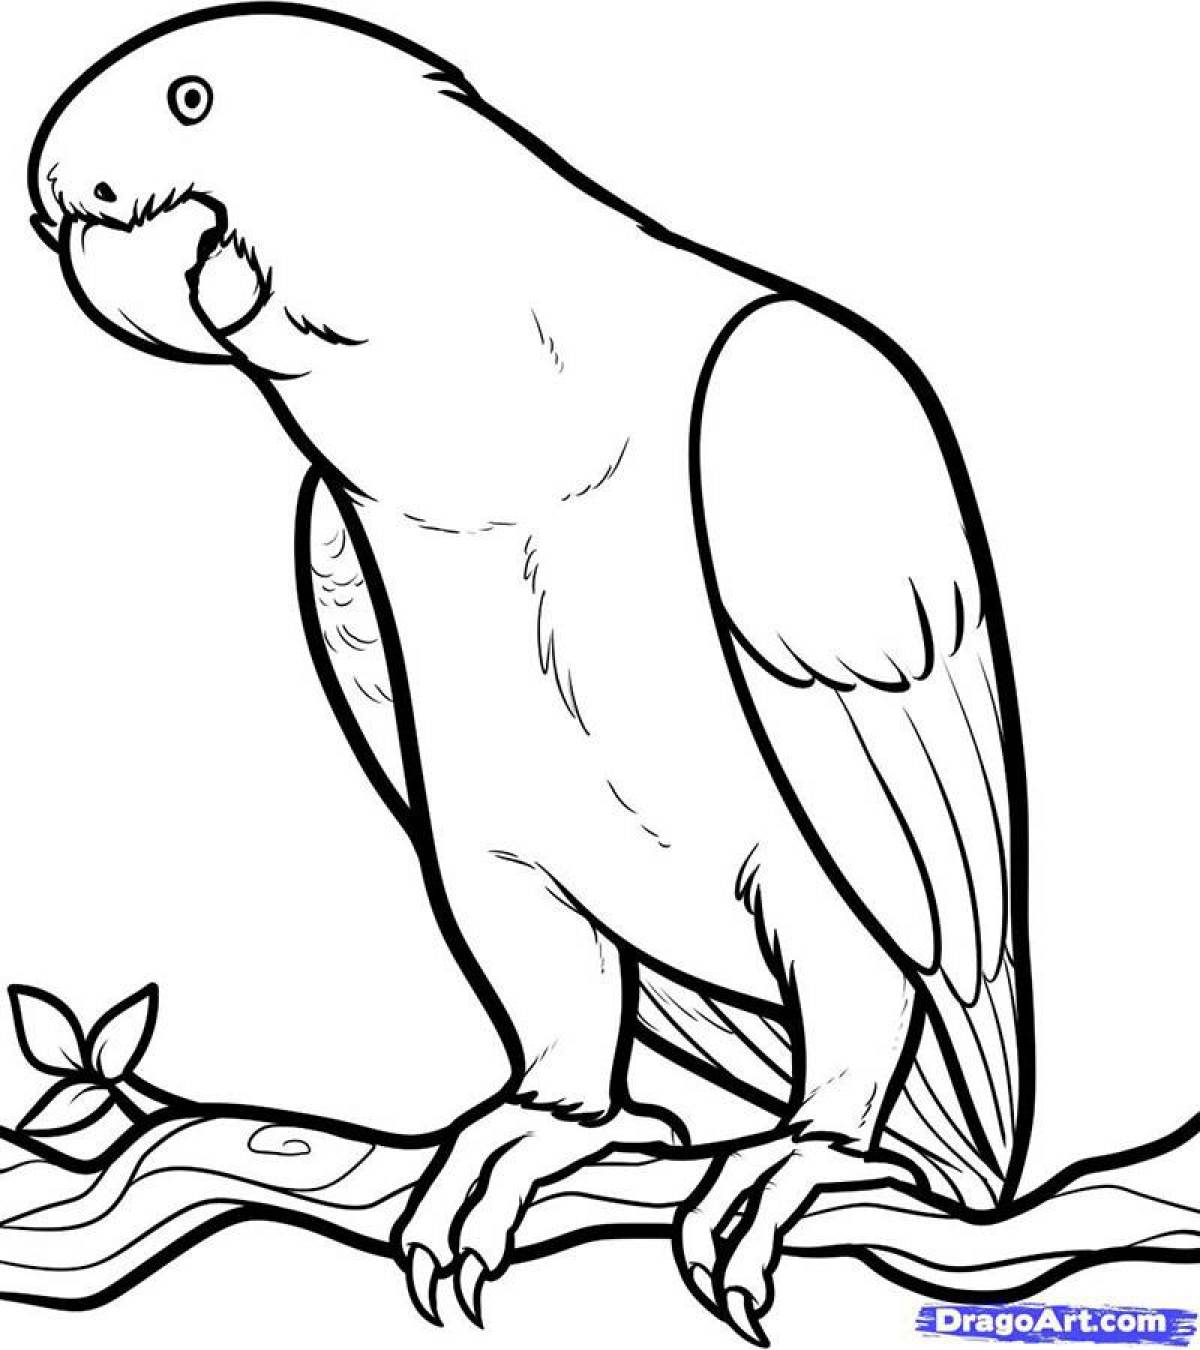 Coloring book glowing parrot